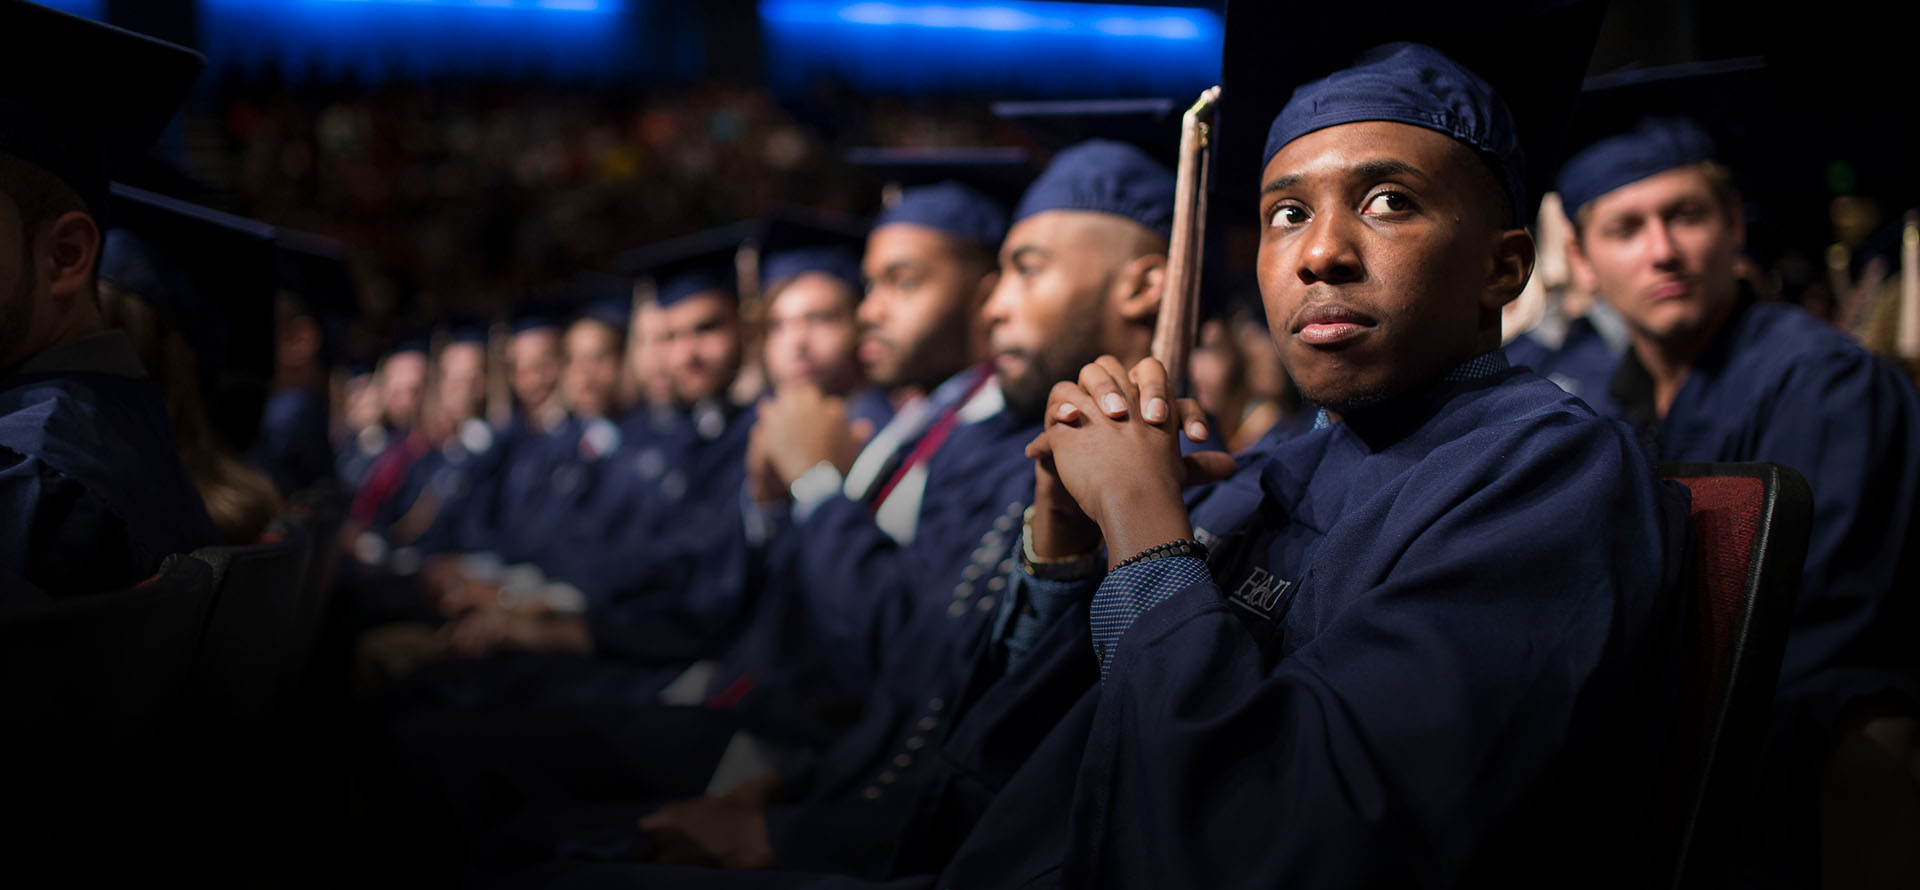 Student in cap and gown sitting down at graduation ceremony